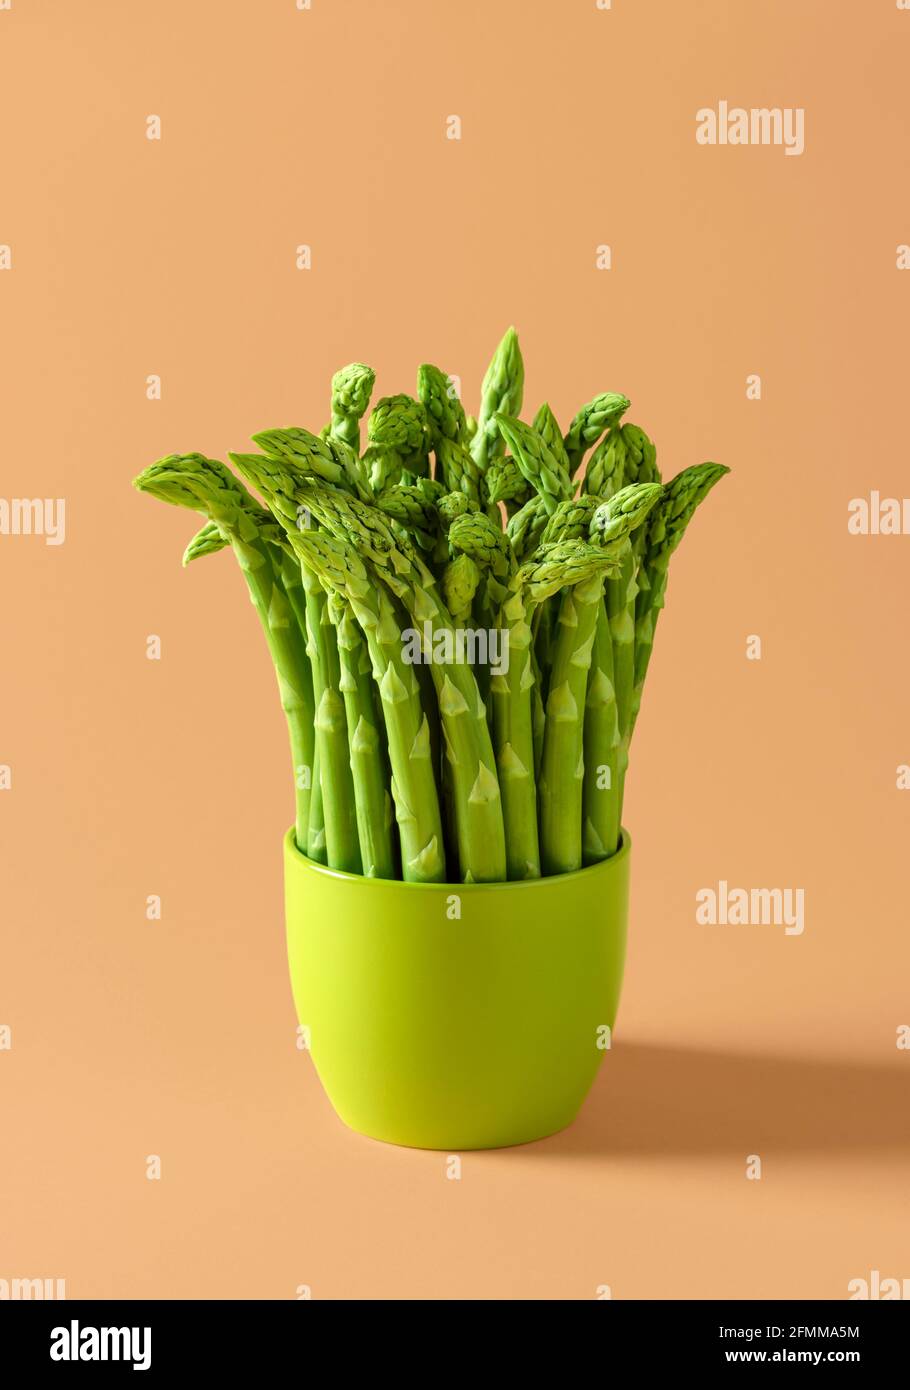 Bunch of raw asparagus in a green ceramic pot on a beige background. Fresh green asparagus on a colored background. Stock Photo